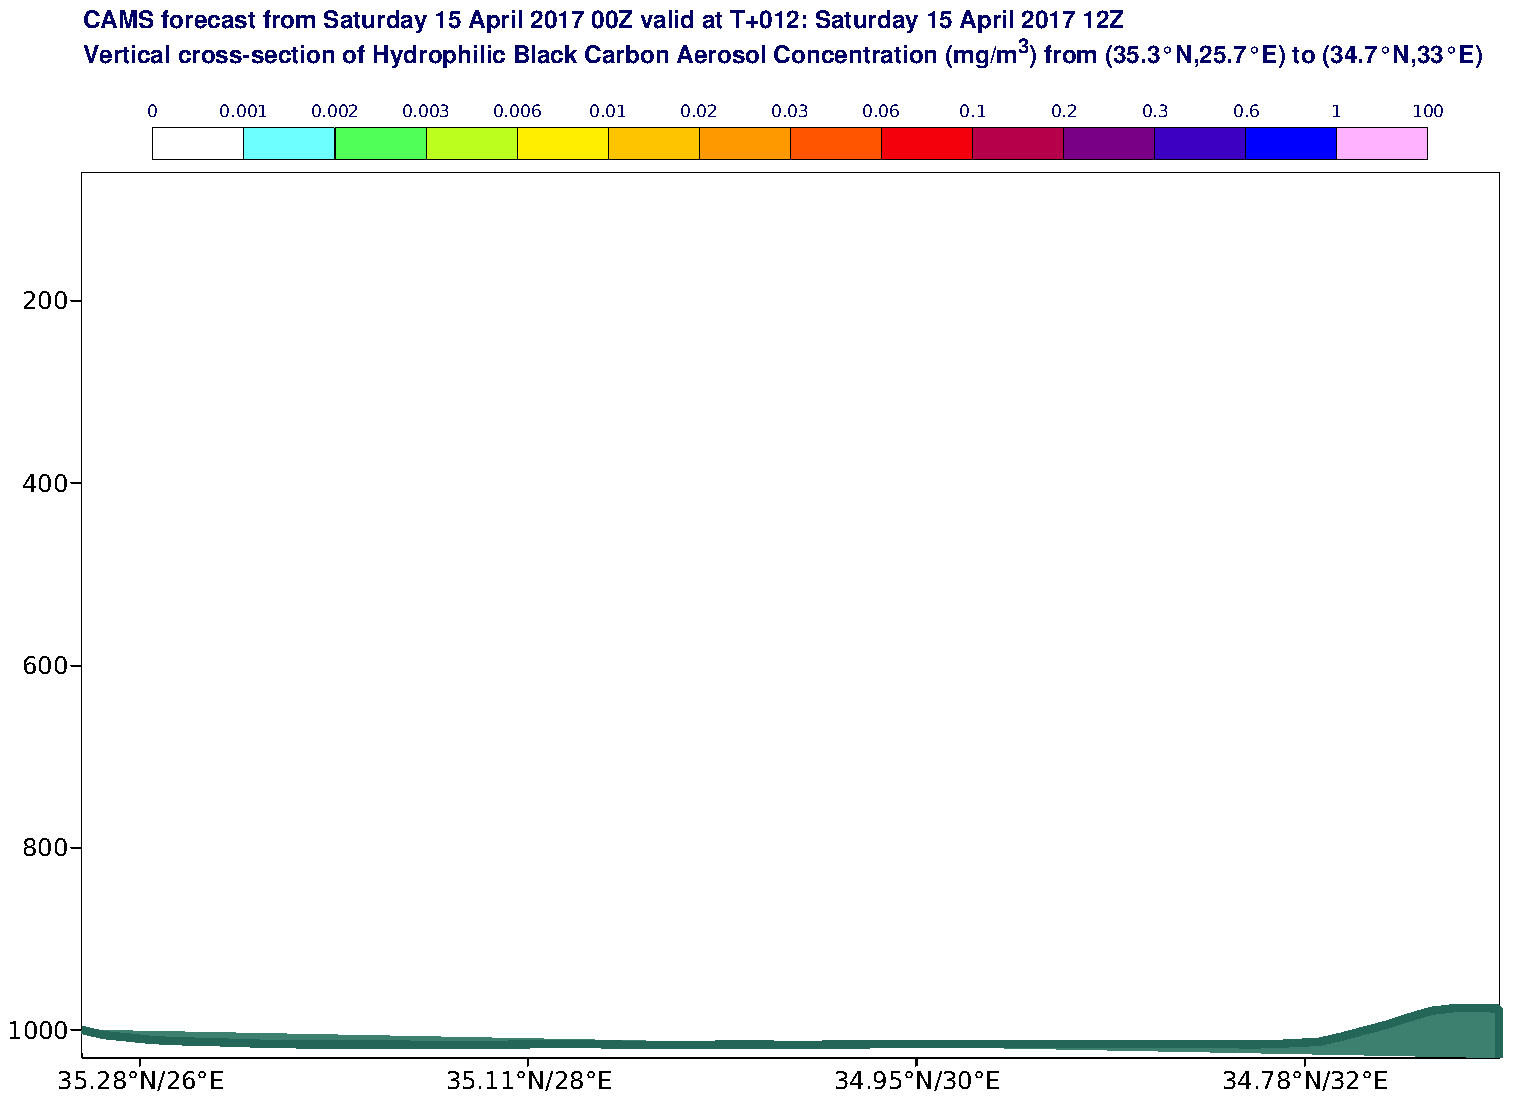 Vertical cross-section of Hydrophilic Black Carbon Aerosol Concentration (mg/m3) valid at T12 - 2017-04-15 12:00